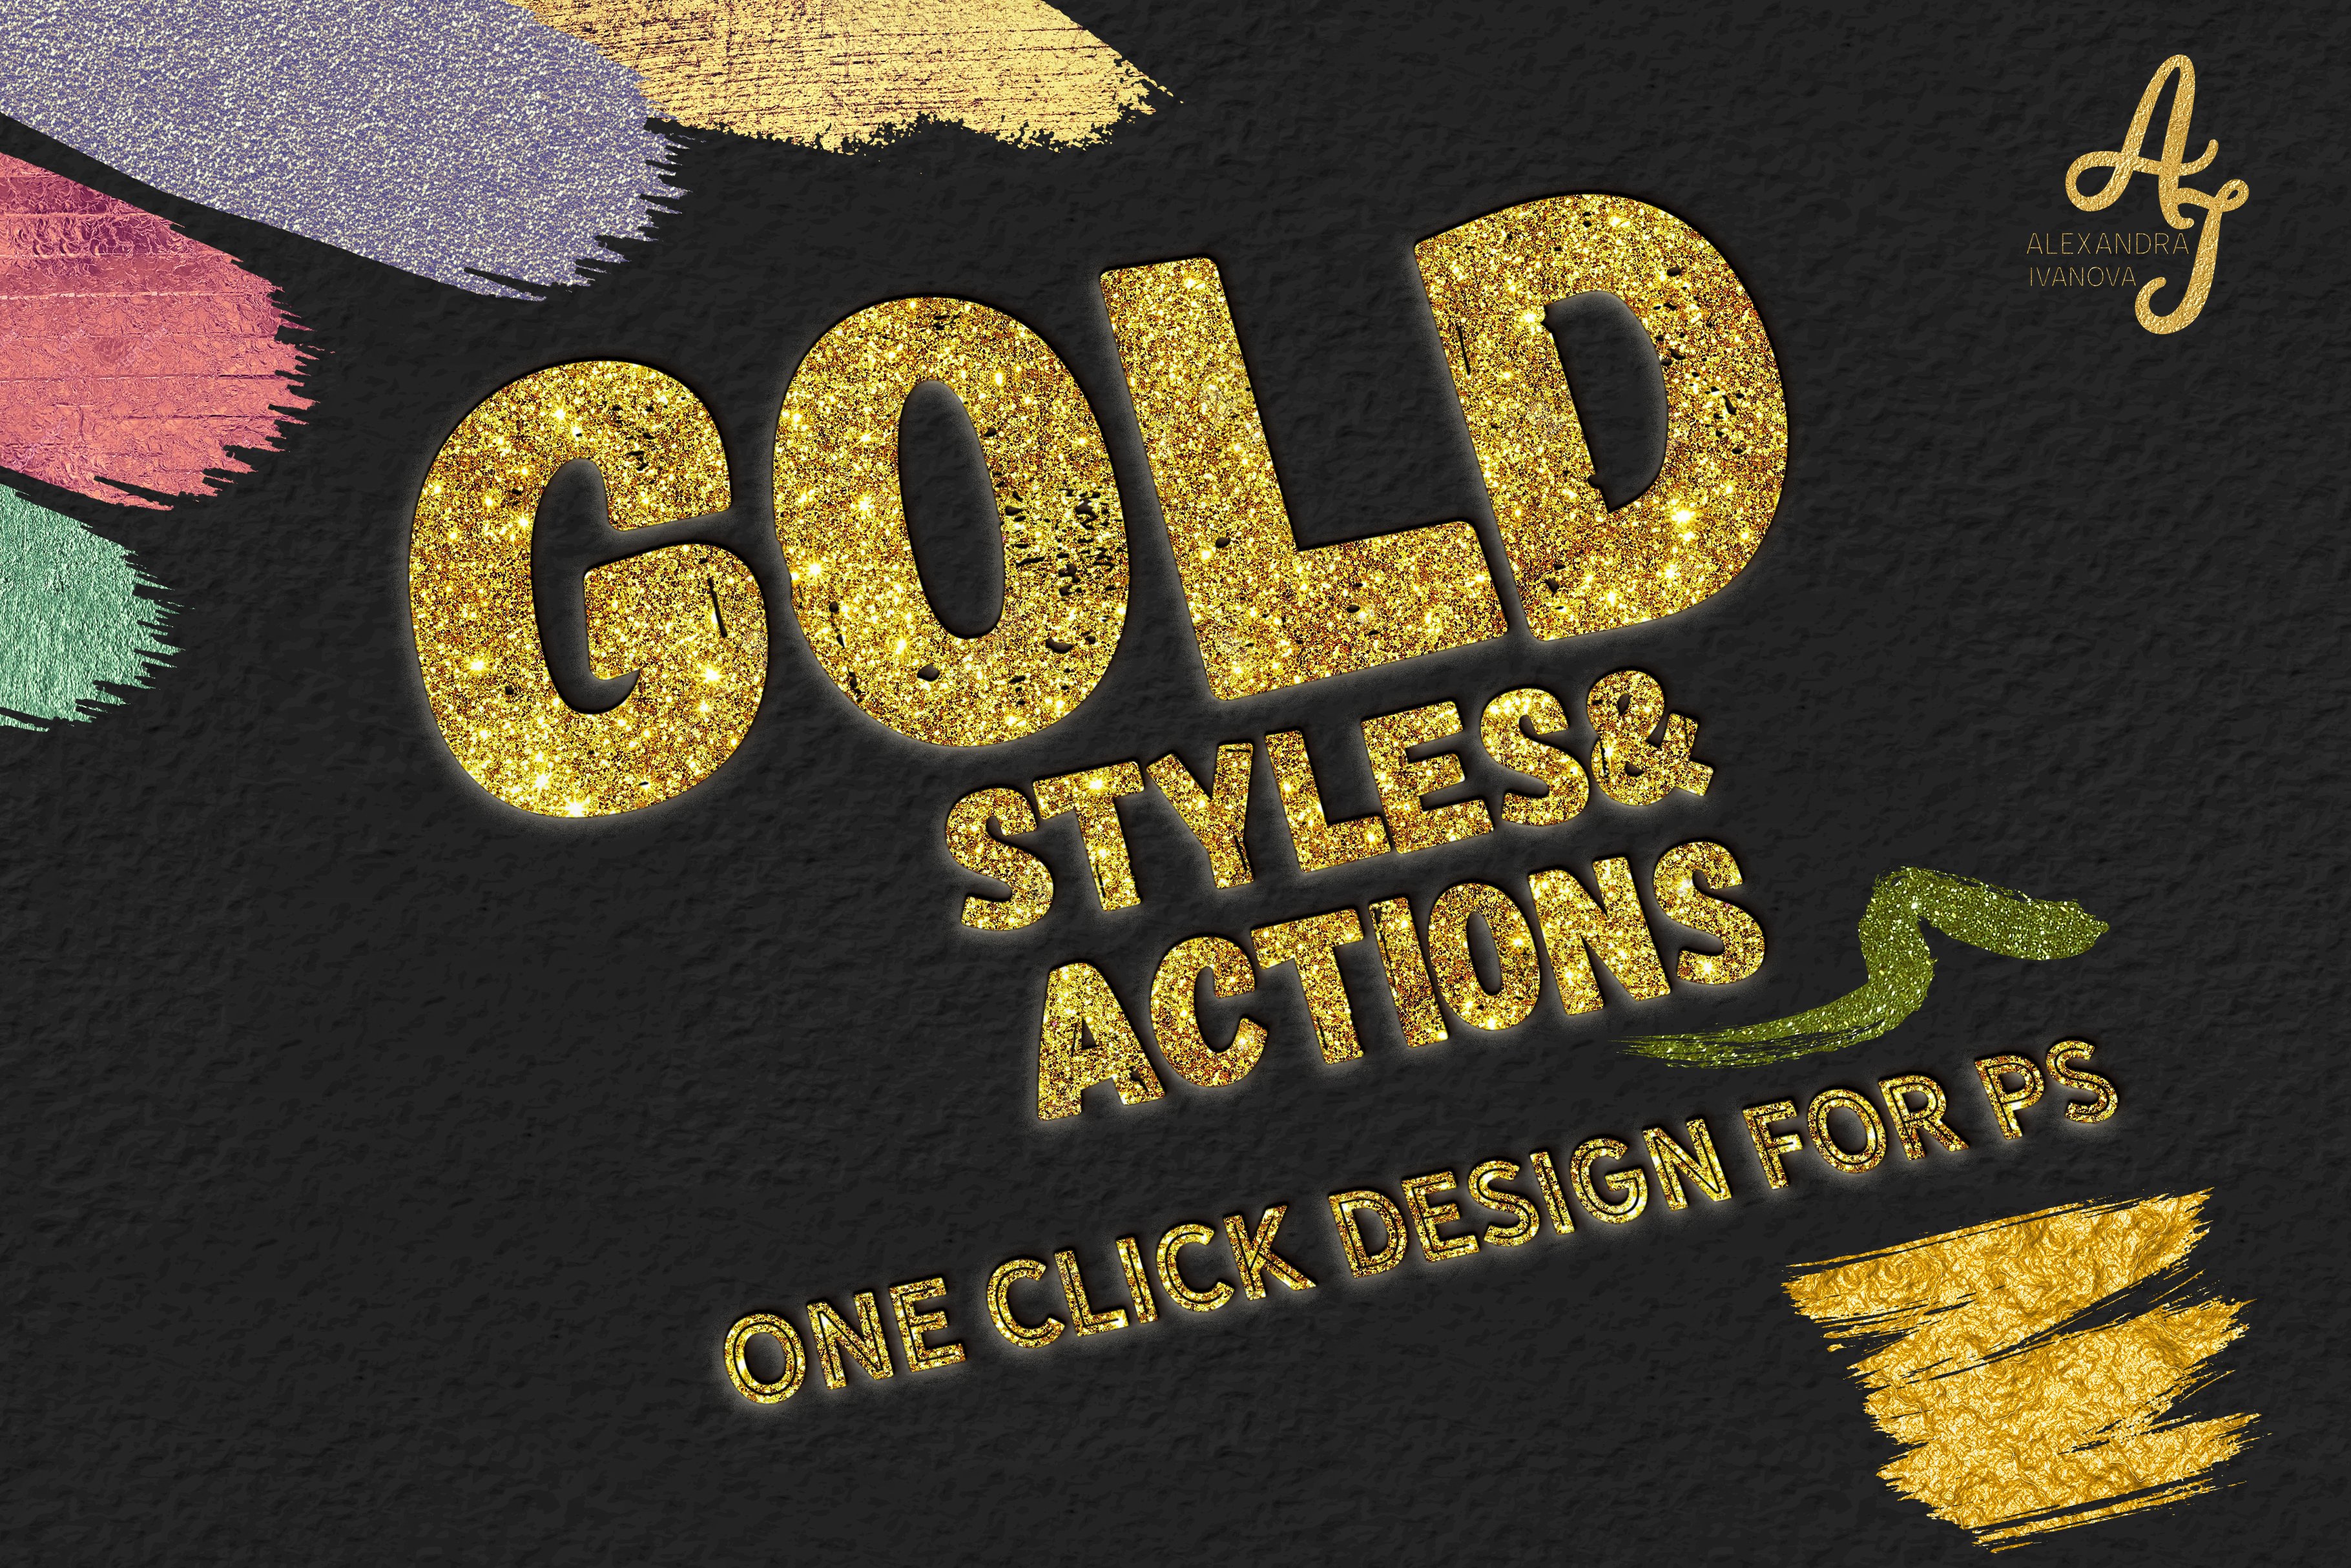 GOLD EFFECT photoshop action freecover image.